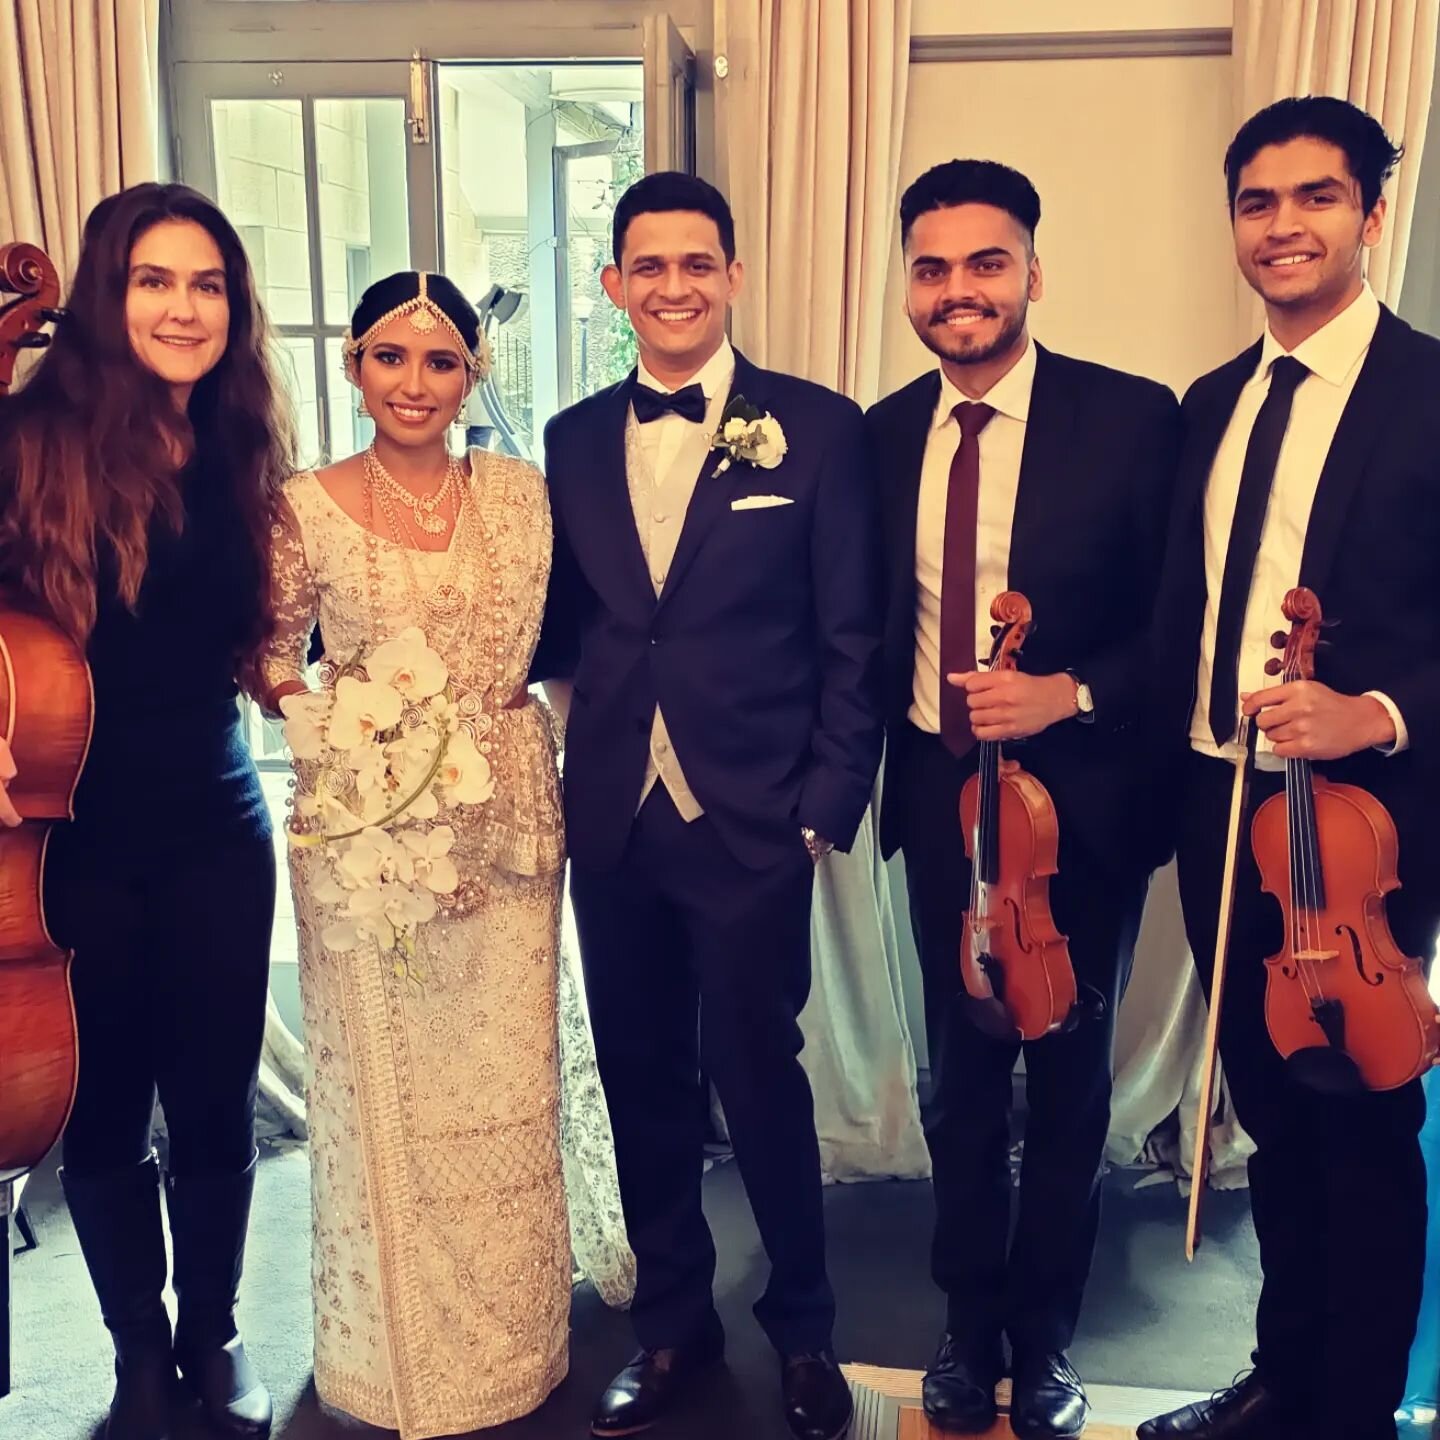 Congratulations to my good friend @___ms.g and her handsome hubby @vidura.liyanage. Wishing you a lifetime of fulfilment!! 

It was an honour to play at your wedding! &hearts;️🎻

#wedding #strings #sinhala #classical #violin #cello